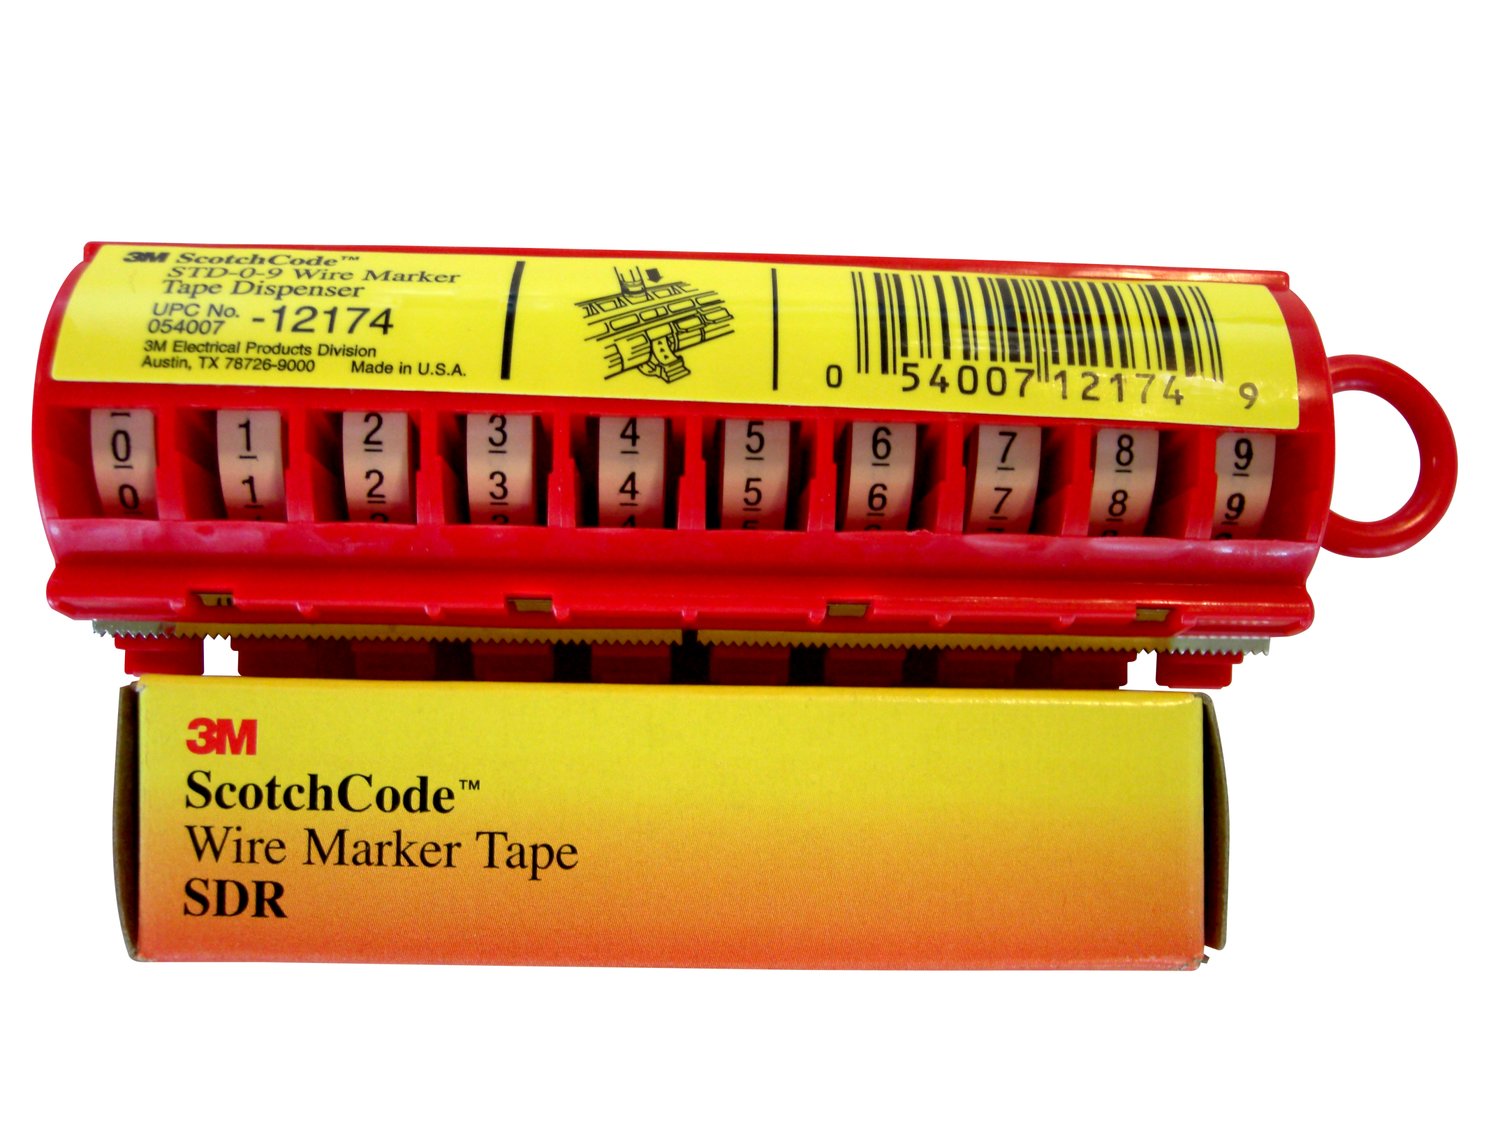 7100031378 - 3M Wire Marker Tape Numbers SDR 60-69, 50 Rolls/Case